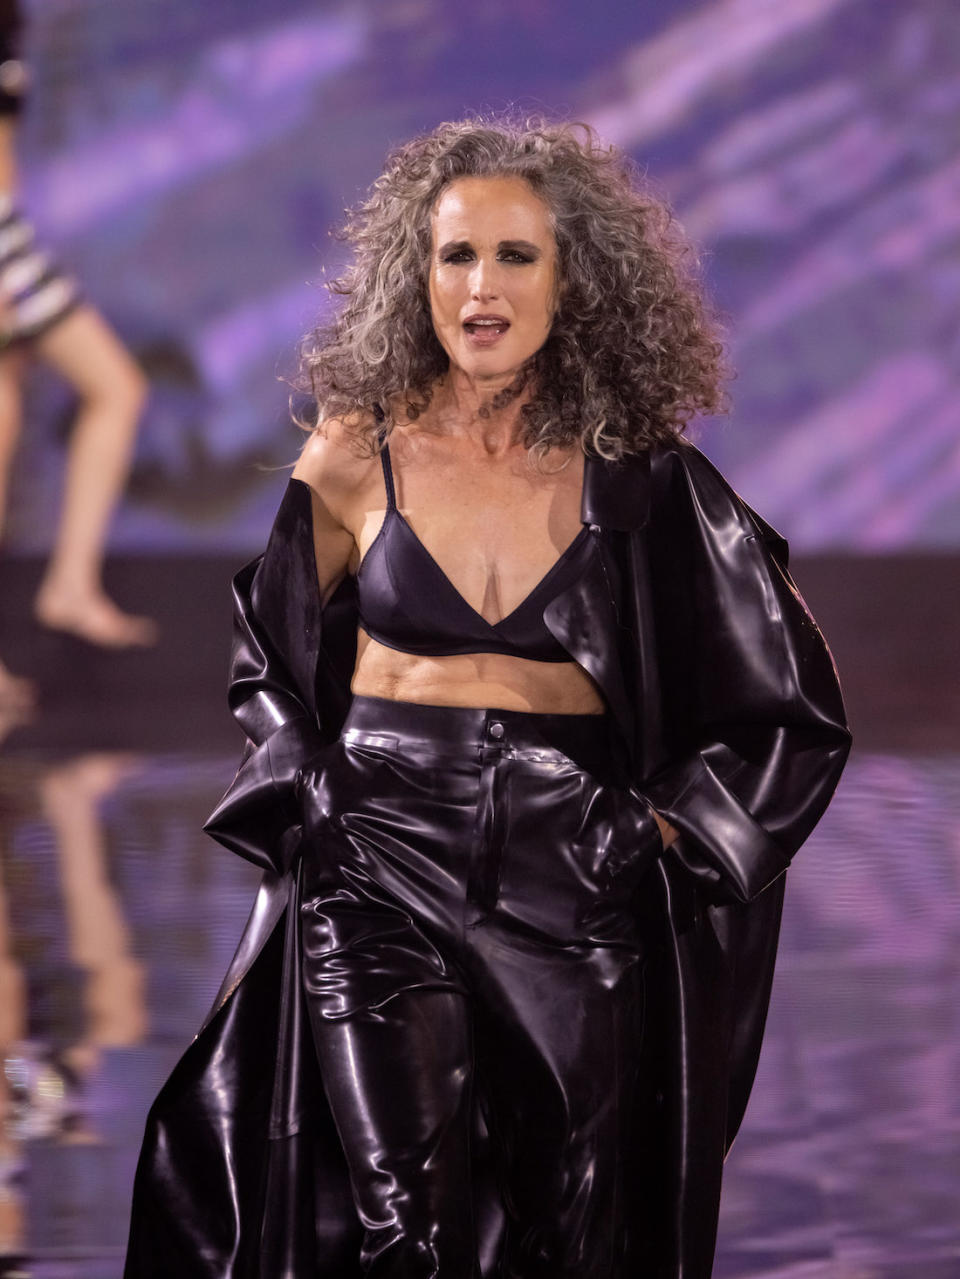 PARIS, FRANCE - OCTOBER 01: (EDITORIAL USE ONLY - For Non-Editorial use please seek approval from Fashion House) Andie MacDowell walks the runway during the "Le Defile - Walk Your Worth" - 6th L'Oreal Show as part of Paris Fashion Week at the Eiffel Tower on October 01, 2023 in Paris, France. (Photo by Arnold Jerocki/Getty Images)